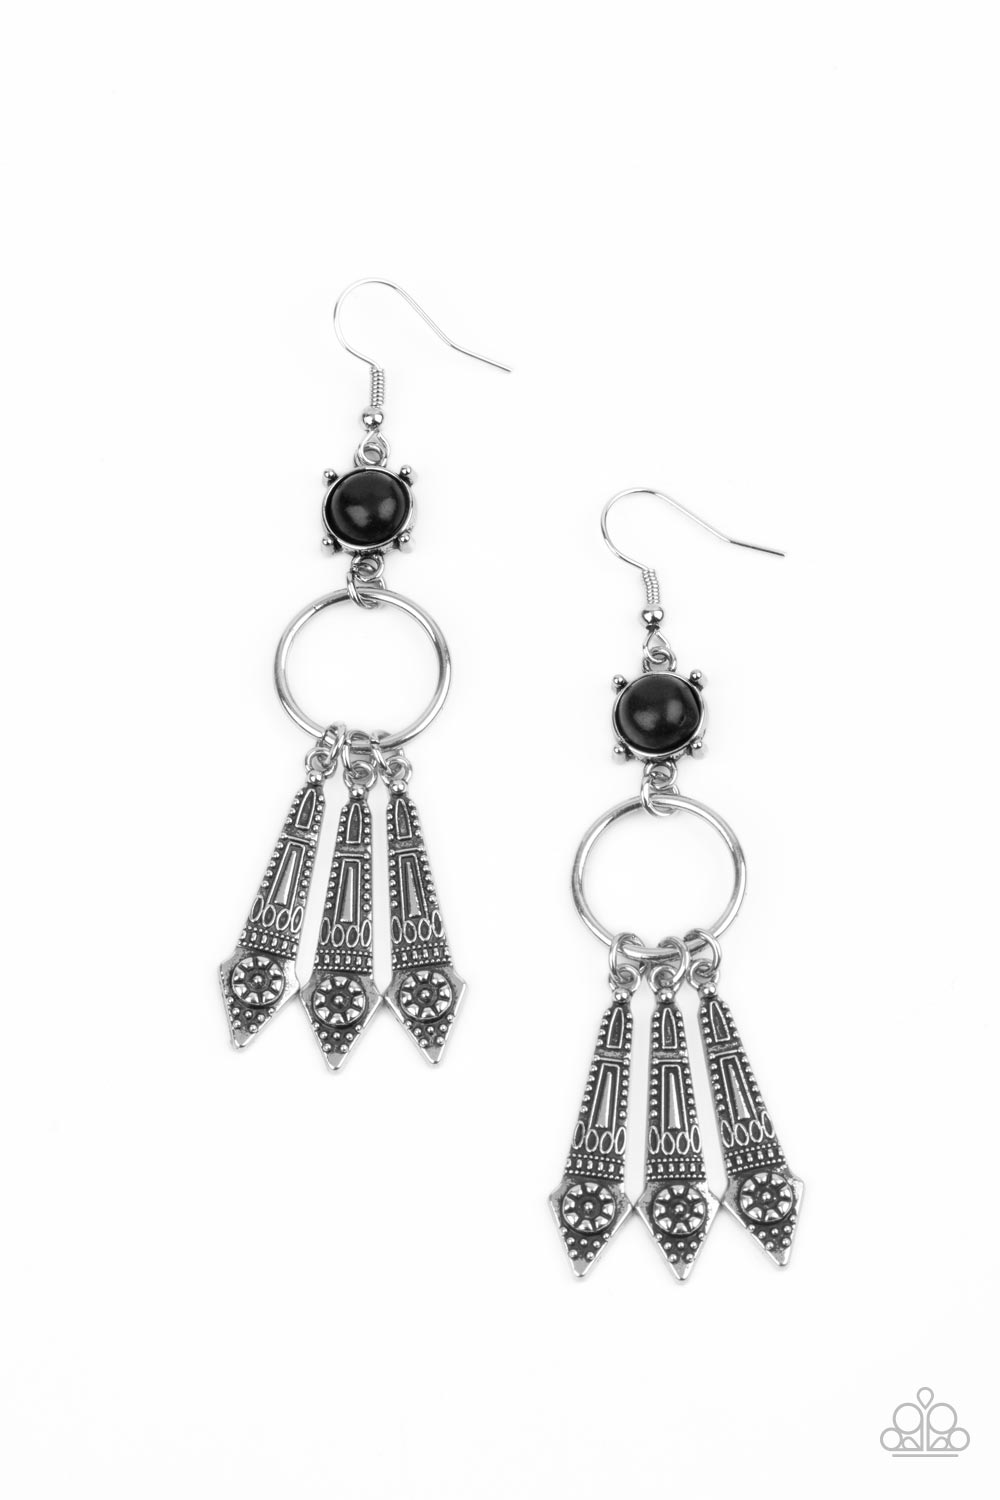 Prana Paradise - Black and Silver Earrings - Paparazzi Accessories - Embellished with dainty flowers, flared silver bars glide along the bottom of a dainty silver ring that attaches to a black stone fitting, creating a whimsical lure. Earring attaches to a standard fishhook fitting. Sold as one pair of earrings.